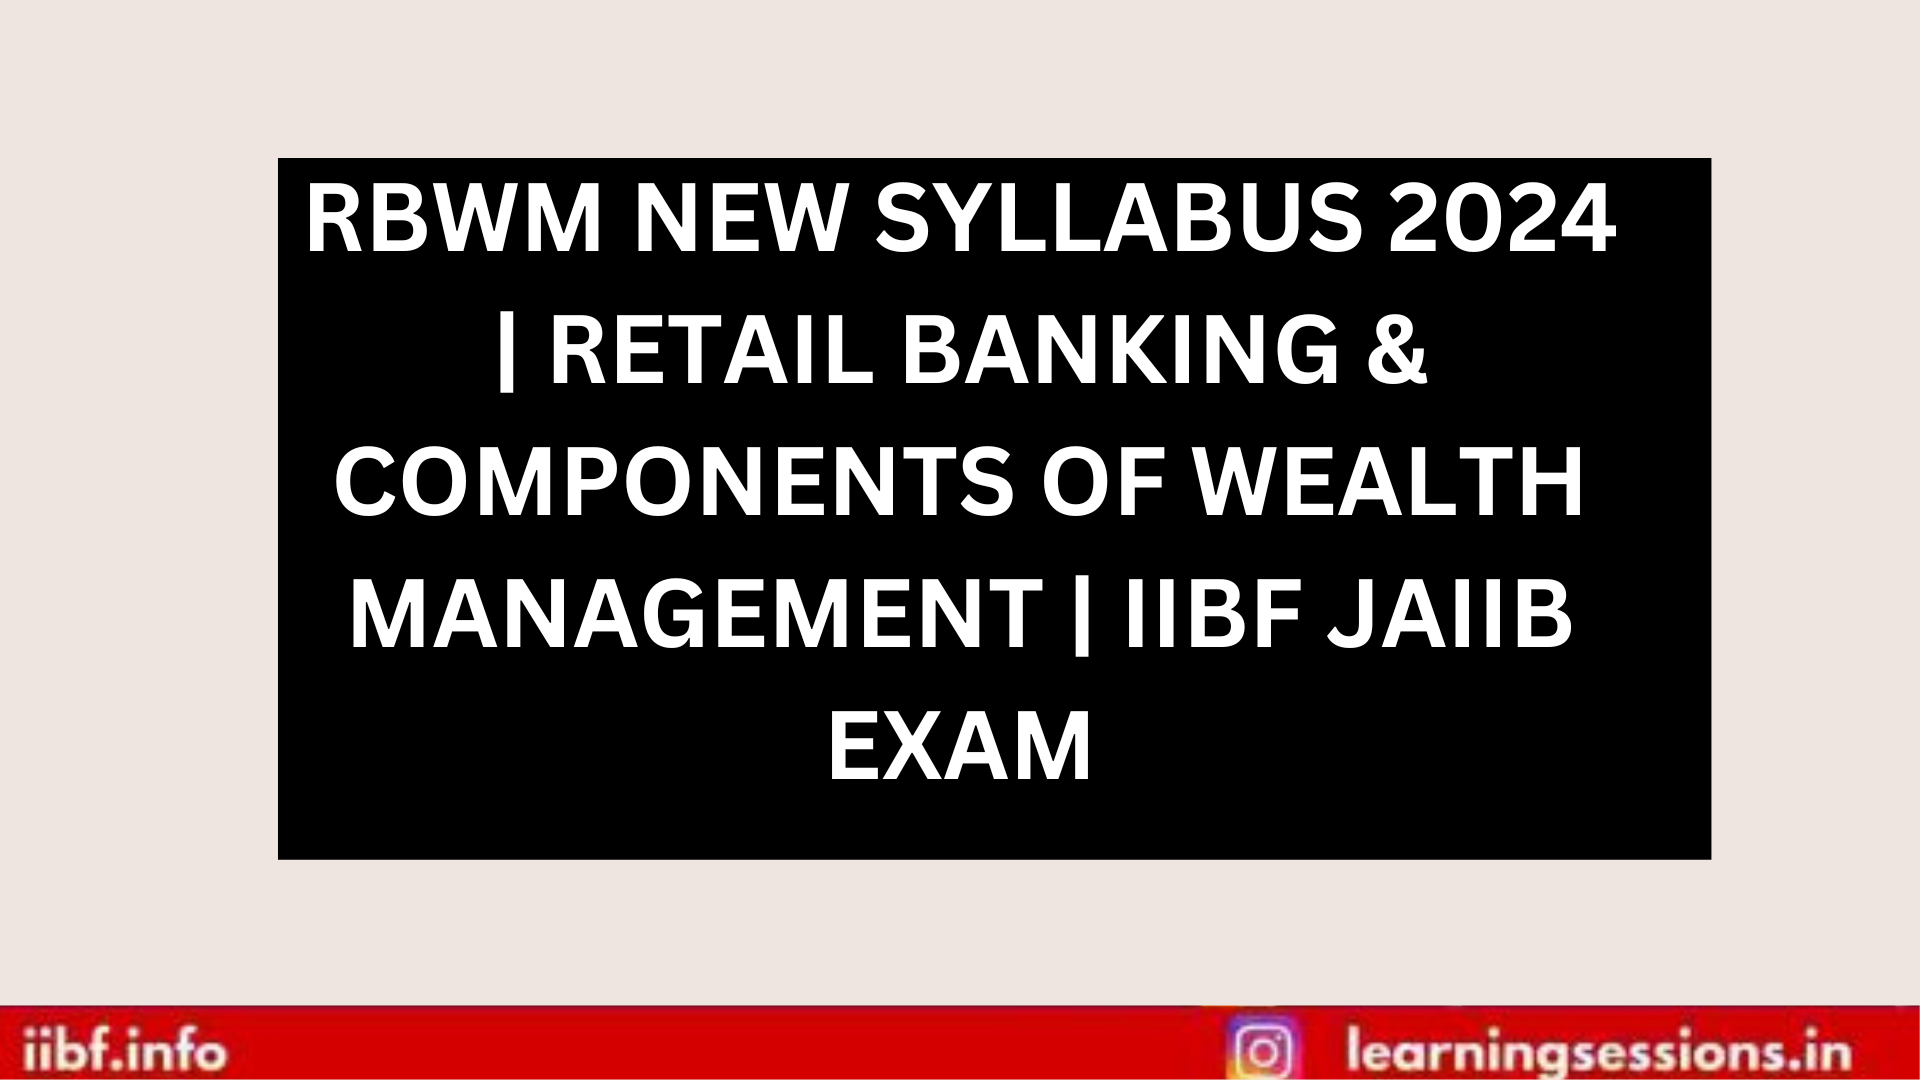 RETAIL BANKING & COMPONENTS OF WEALTH MANAGEMENT